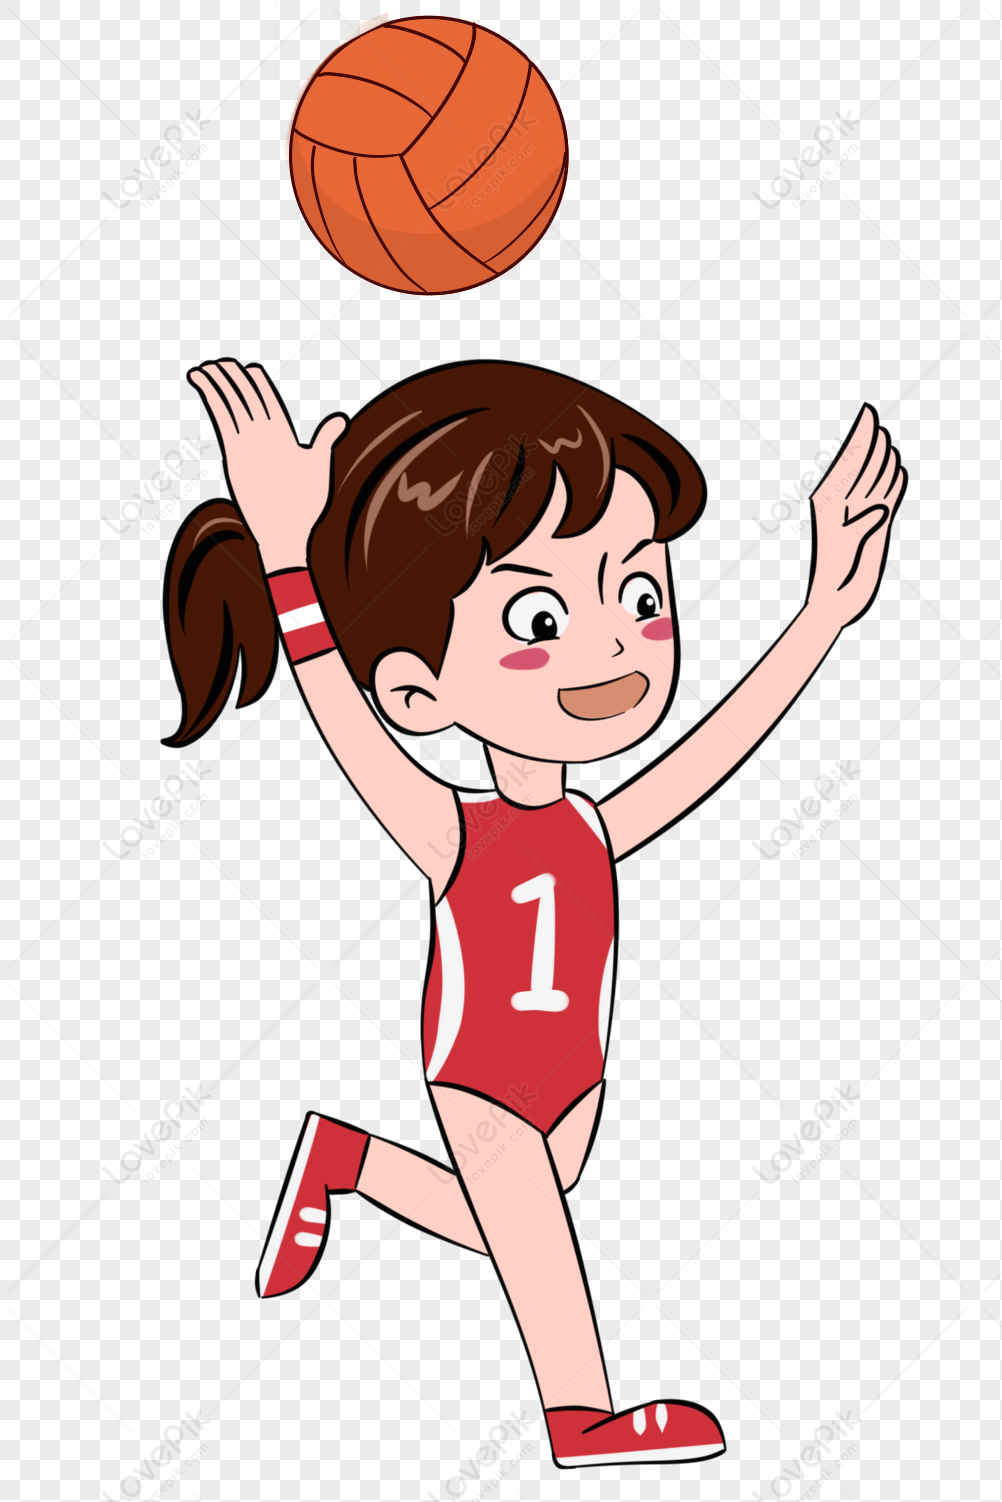 Playing Volleyball Player Cartoon Character Hand Drawn PNG Image And  Clipart Image For Free Download - Lovepik | 401382768